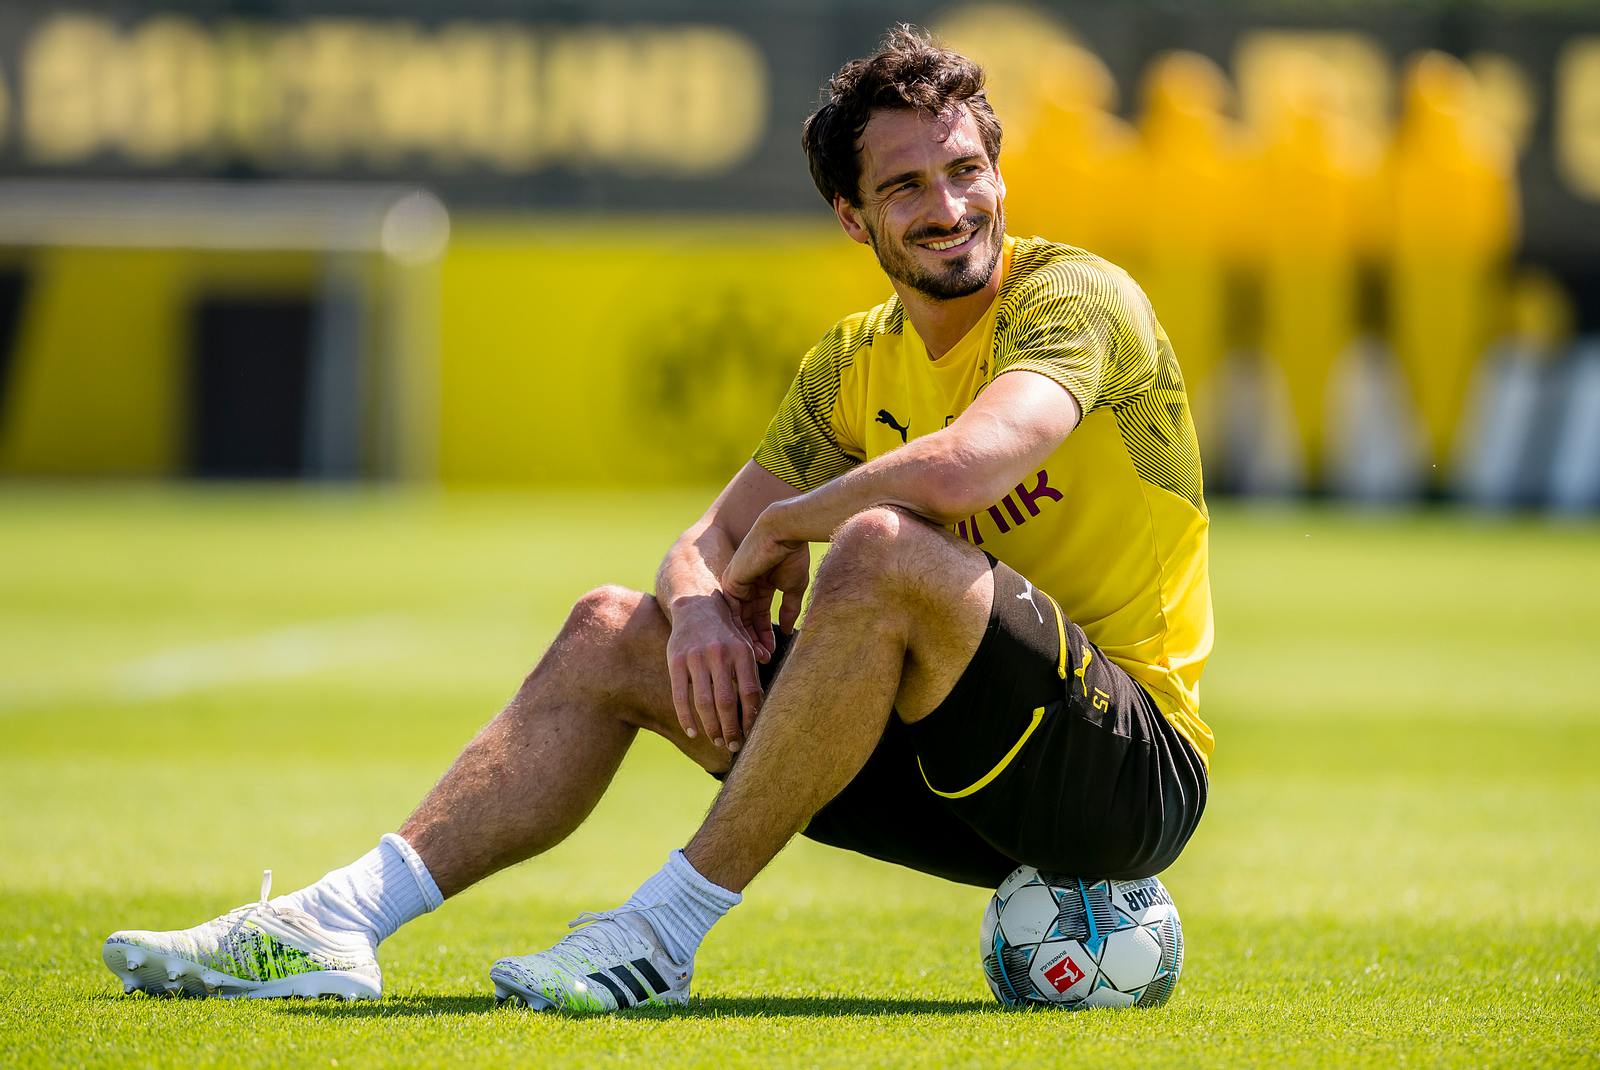 Prices For Hummels